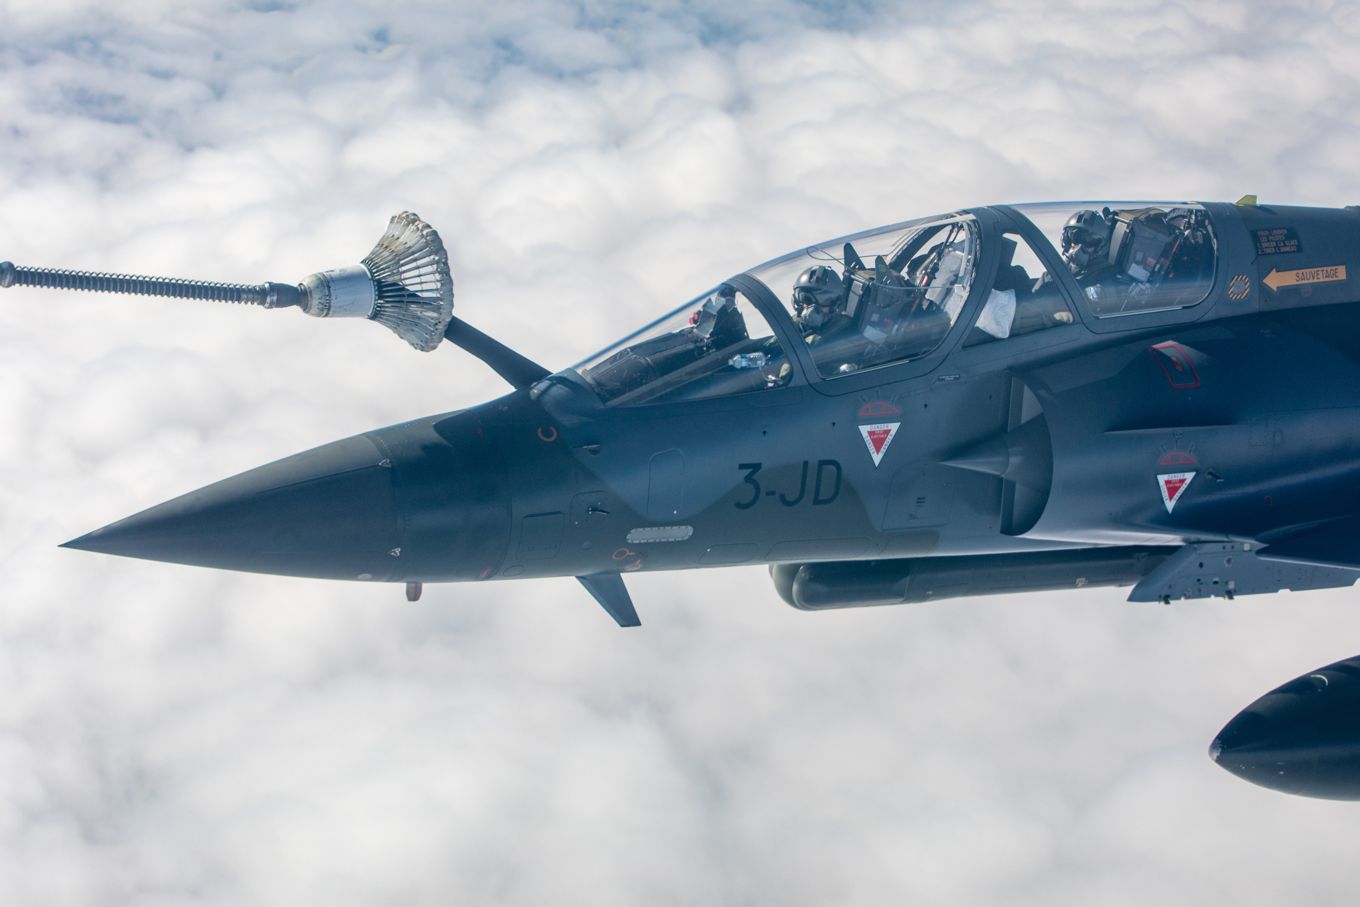 Image shows a French Mirage 2000 aircraft while conducting air-to-air refuelling.